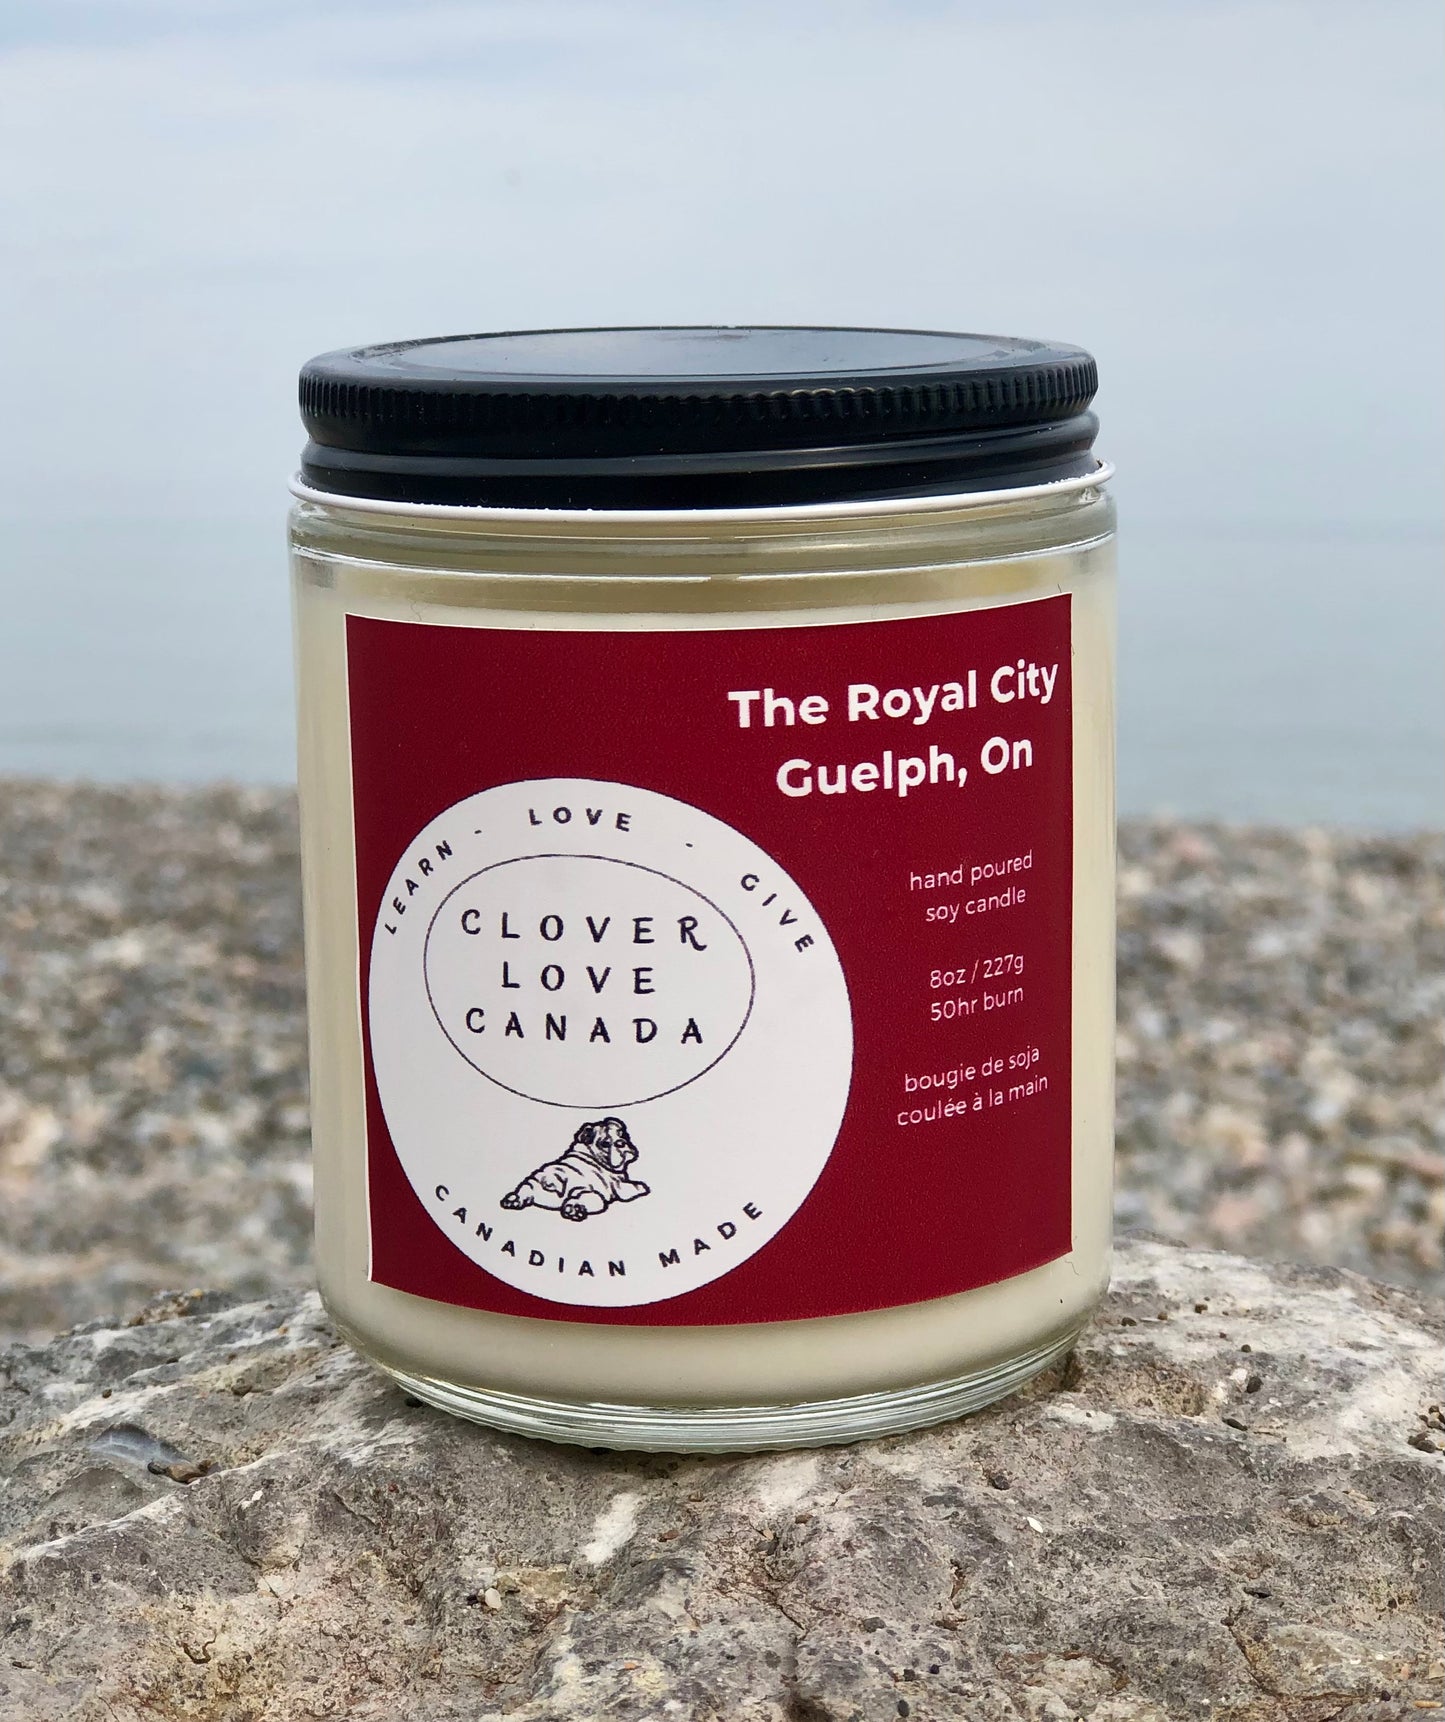 Guelph Ontario hand poured soy scented wax candle fragrance The Royal City 8 oz